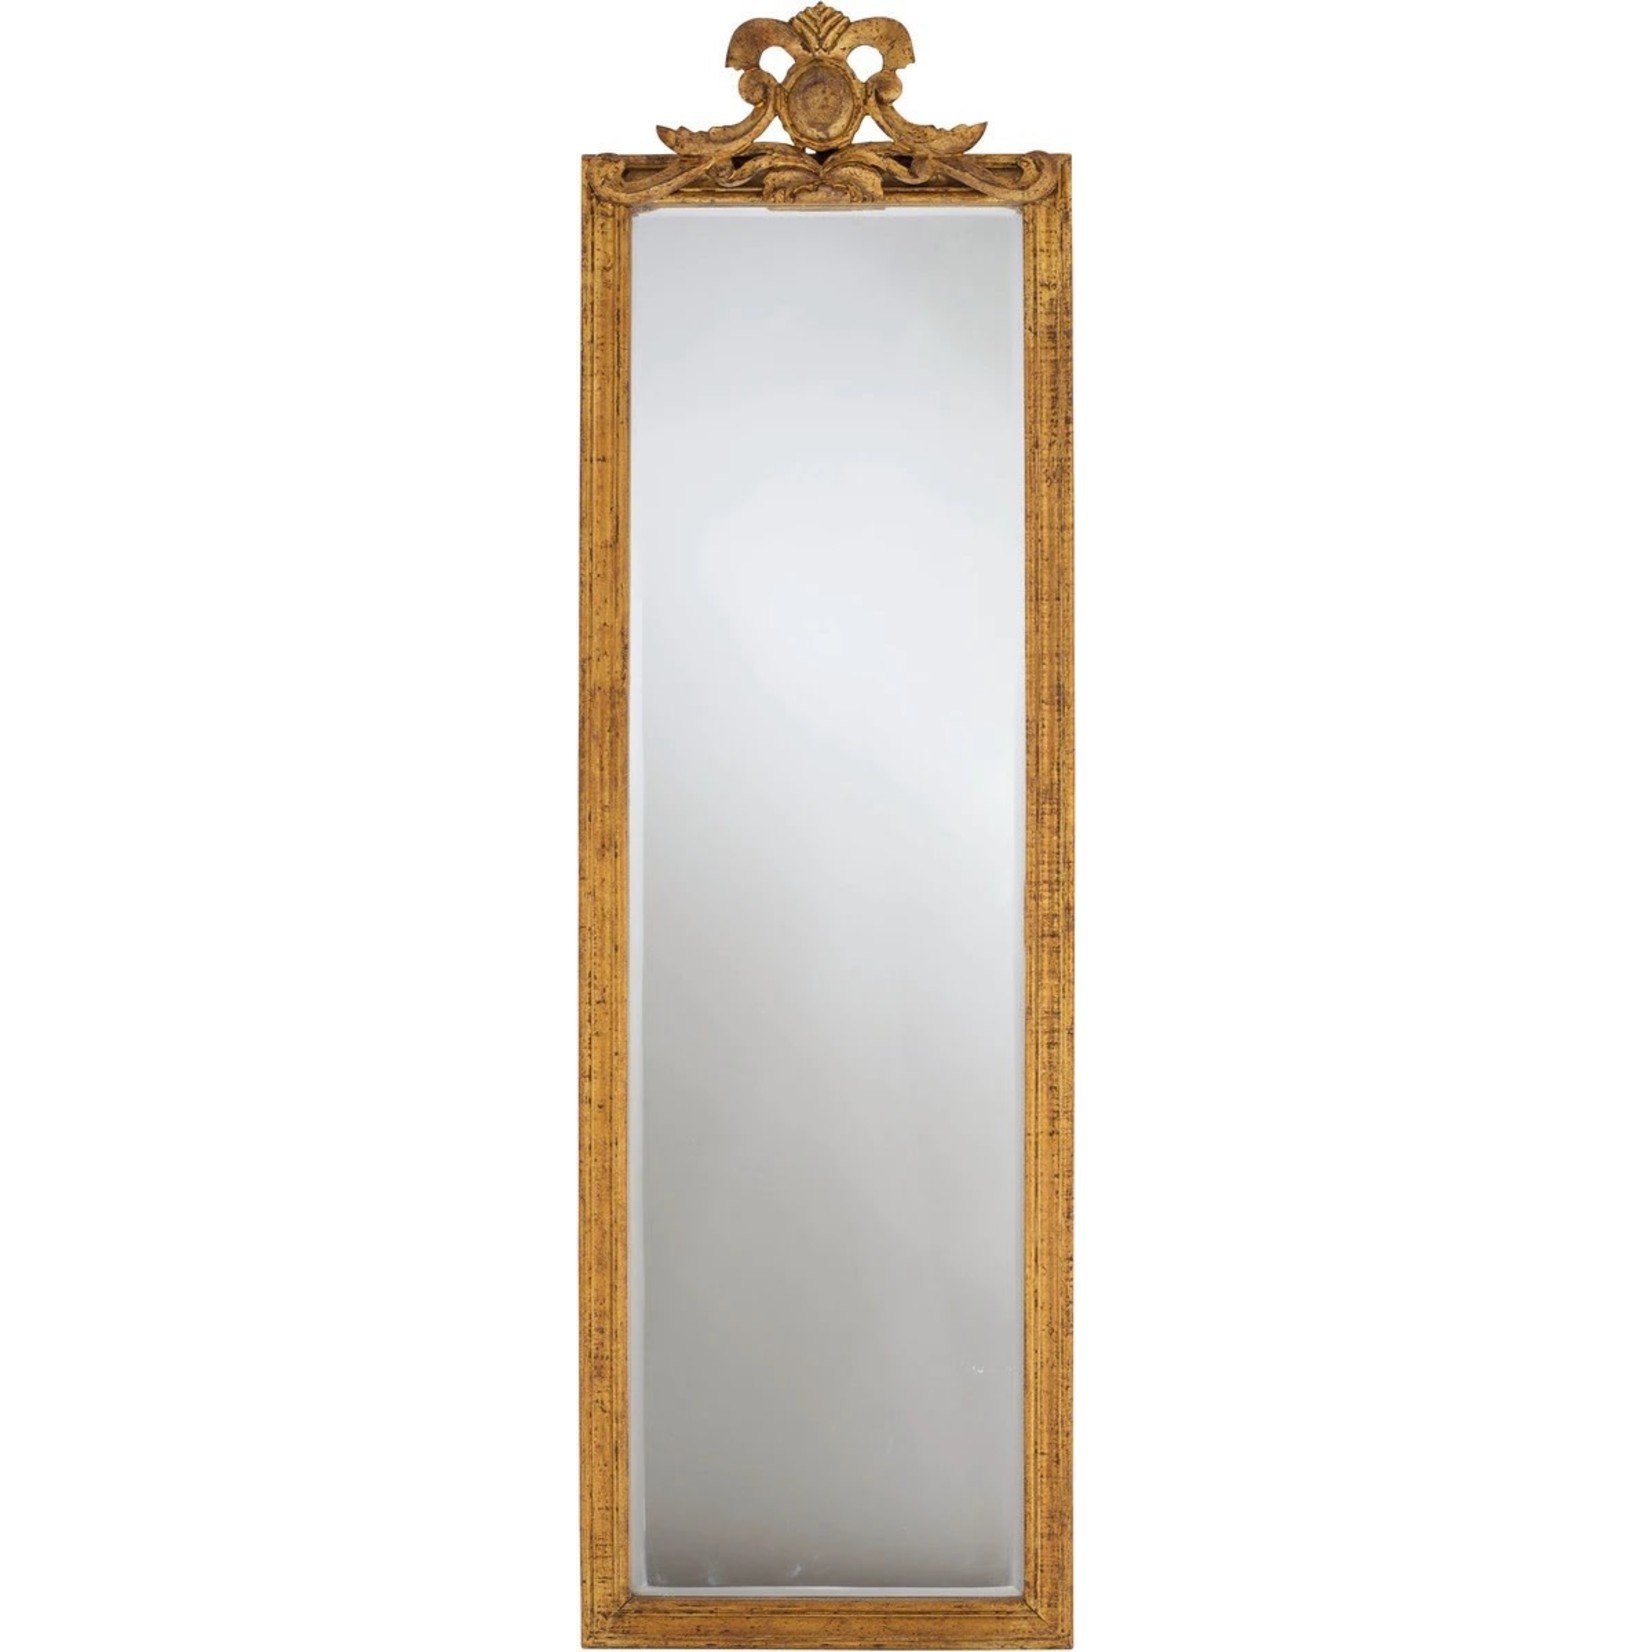 GOLD TALL FRENCH MIRROR 17X55